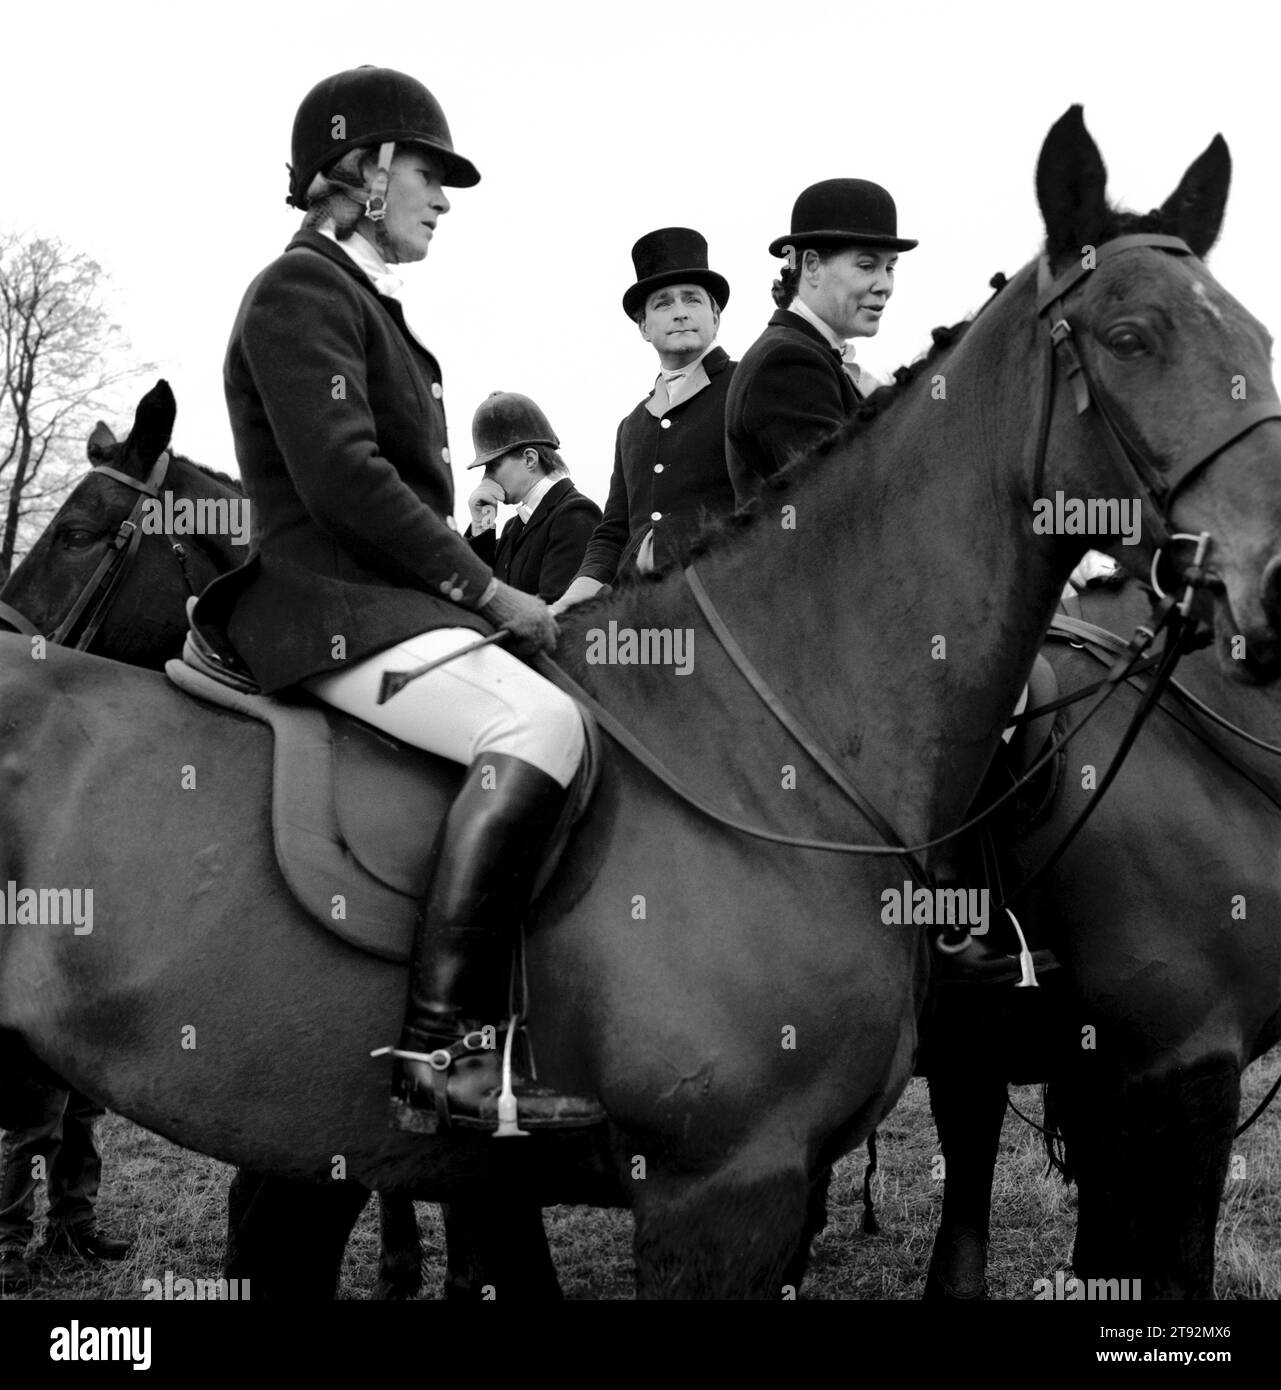 Fox Hunting U. The Duke of Beaufort Hunt, the traditional Boxing Day Meet is held at Worcester Lodge, on the Badminton estate. It is usual for several hundred mounted followers and an equal number of foot followers to attend along with a TV crew or two. Near Didmarton, Gloucestershire 2002 2000s UK England HOMER SYKES Stock Photo